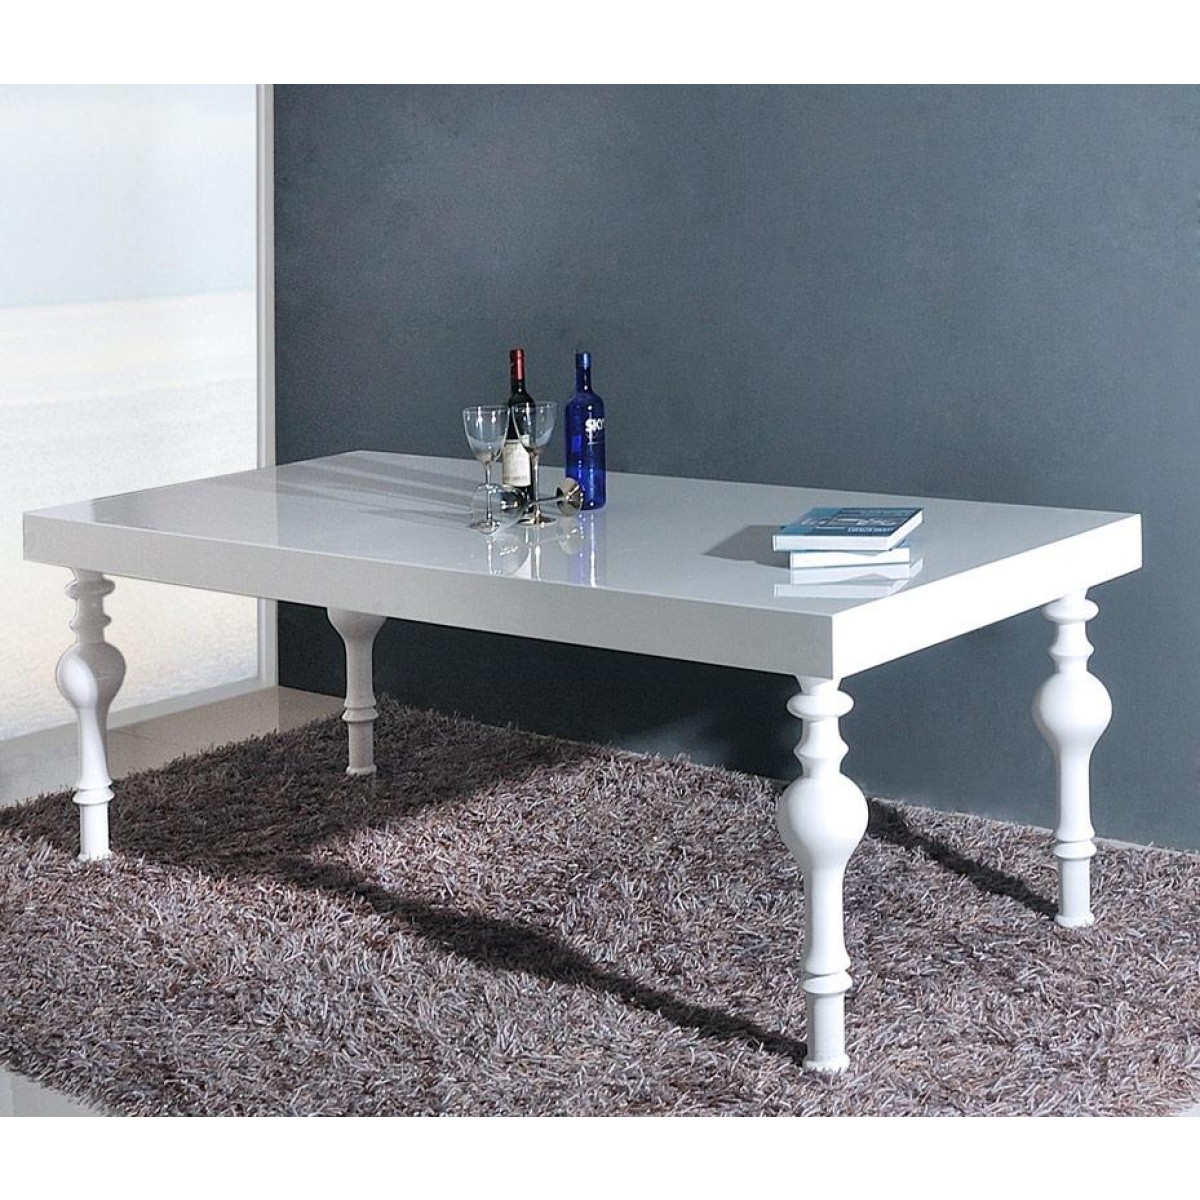 Shop Silver Orchid Brody White High Gloss Dining Table On Sale